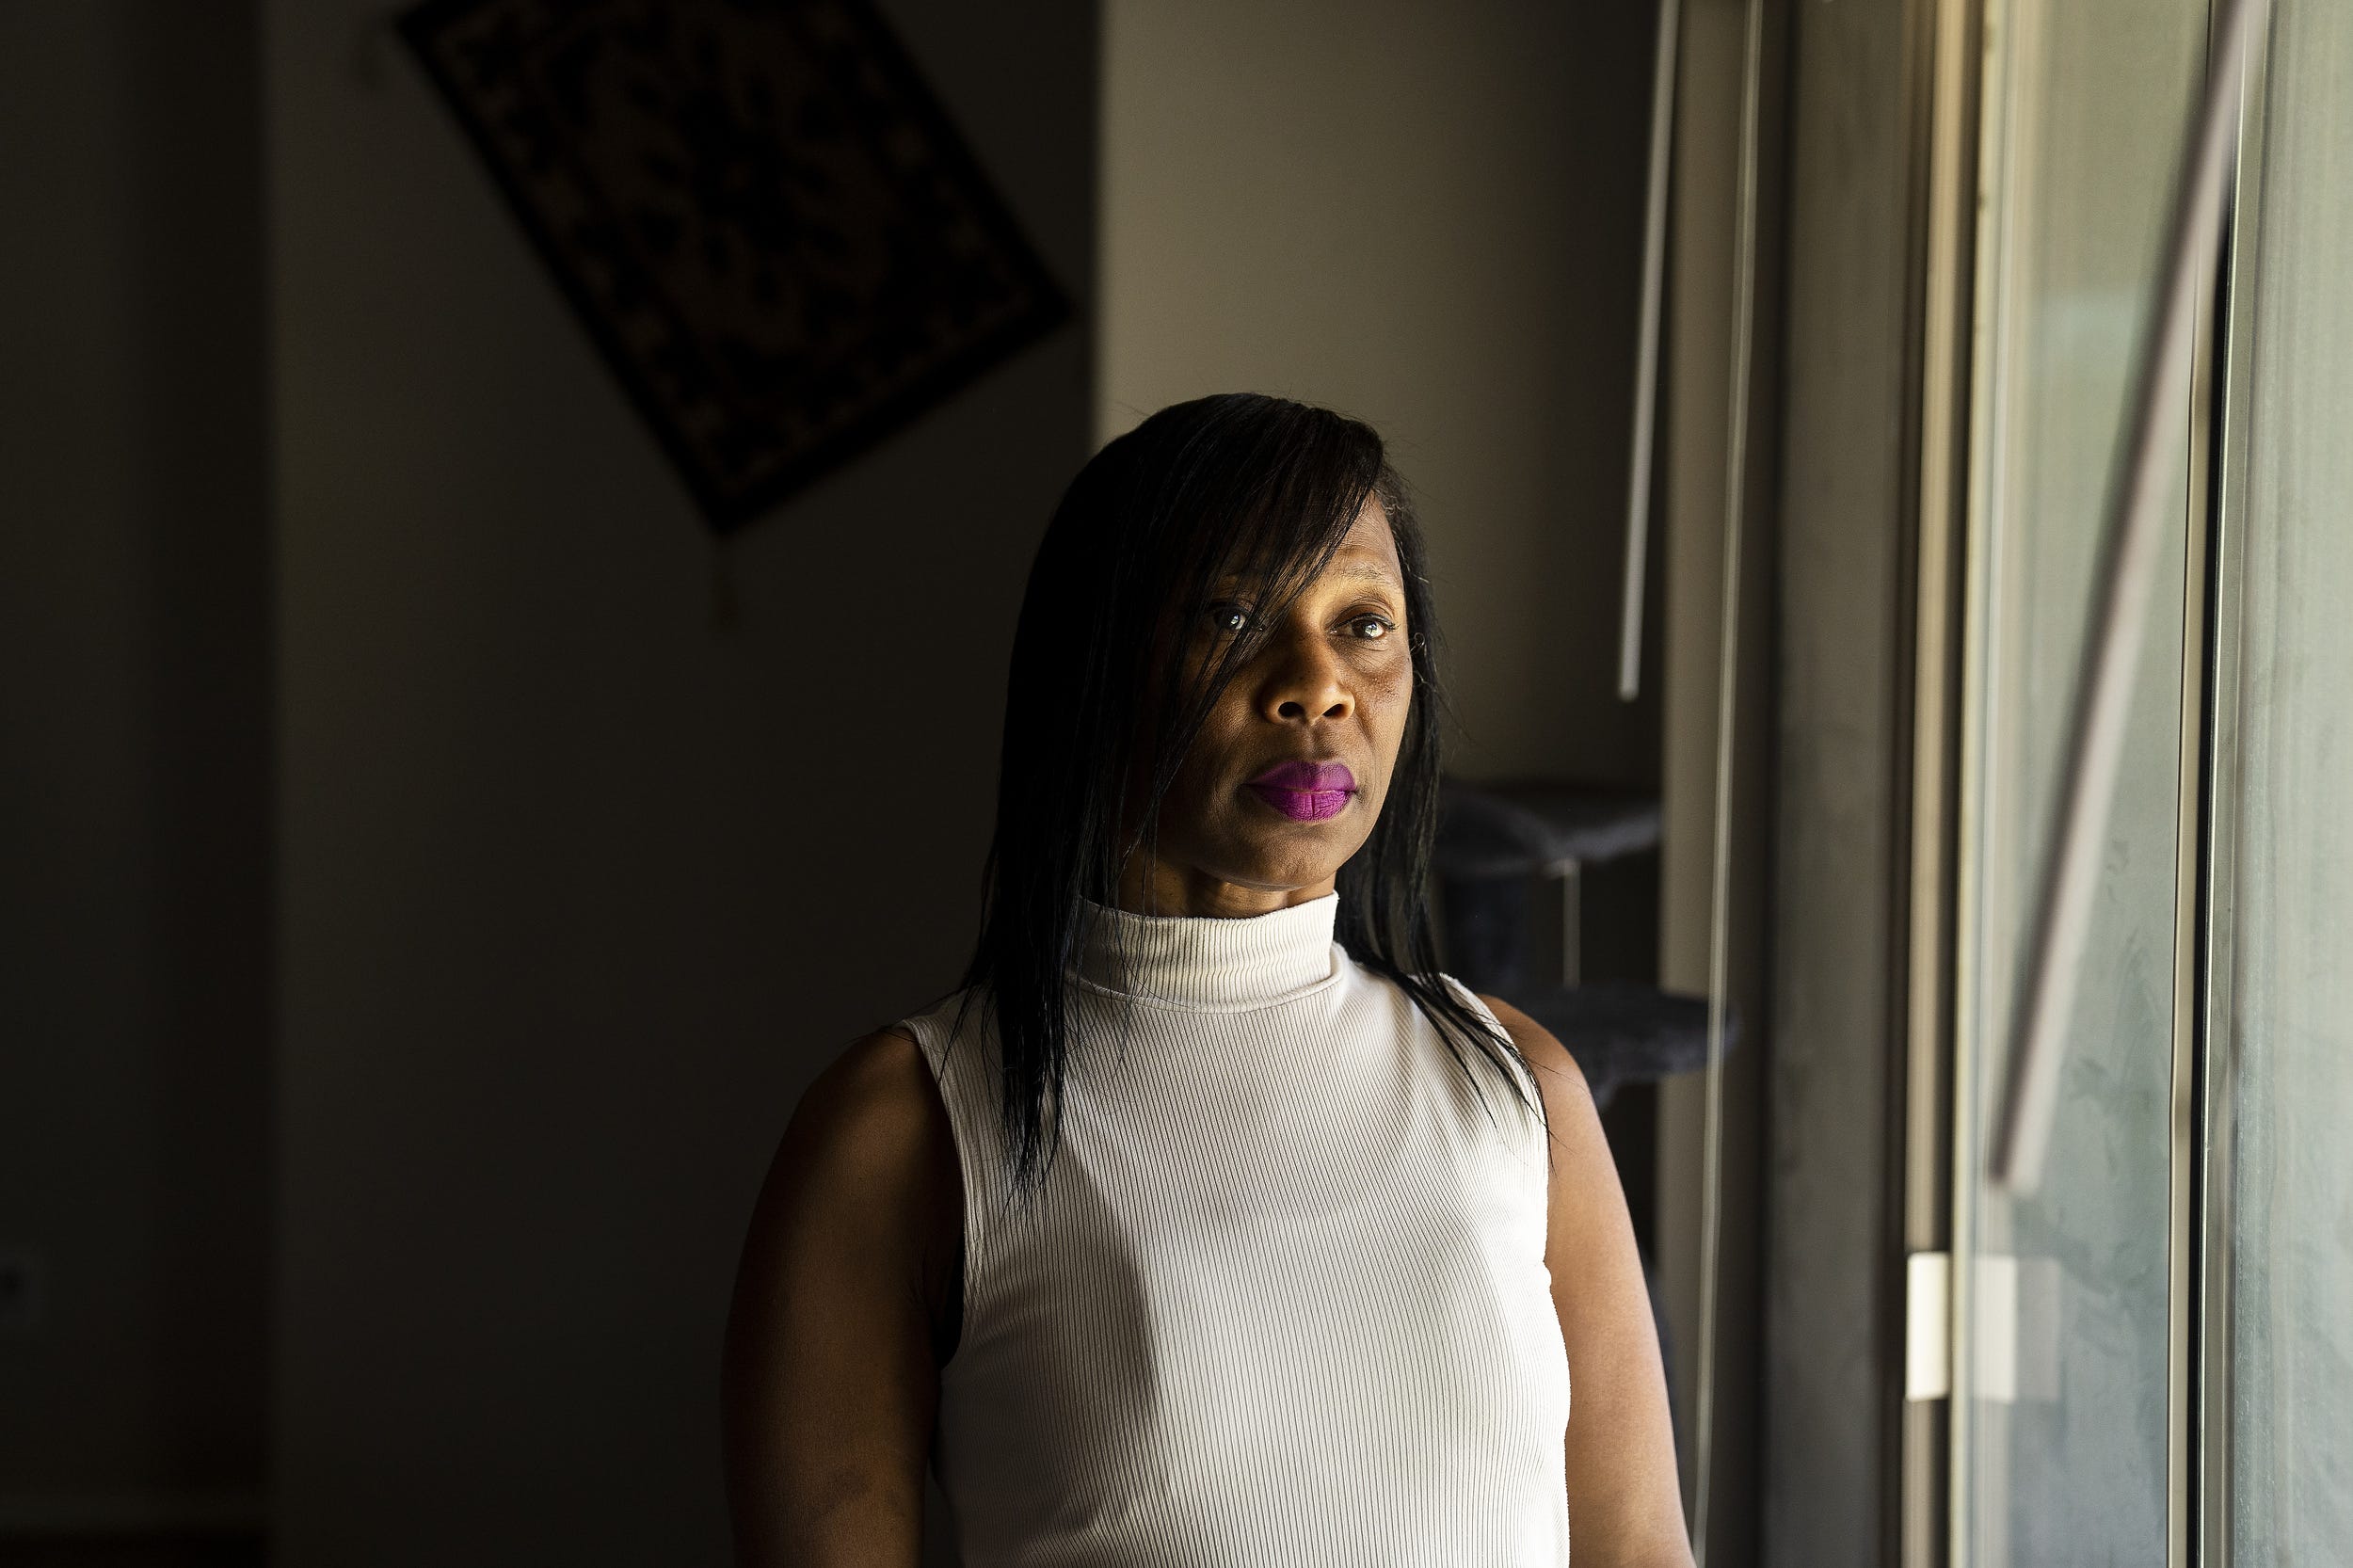 JoAnn Ellis got on a waitlist for a housing voucher in early 2021 and in October, she qualified. But her voucher expired when she couldn't find a landlord who would accept it.